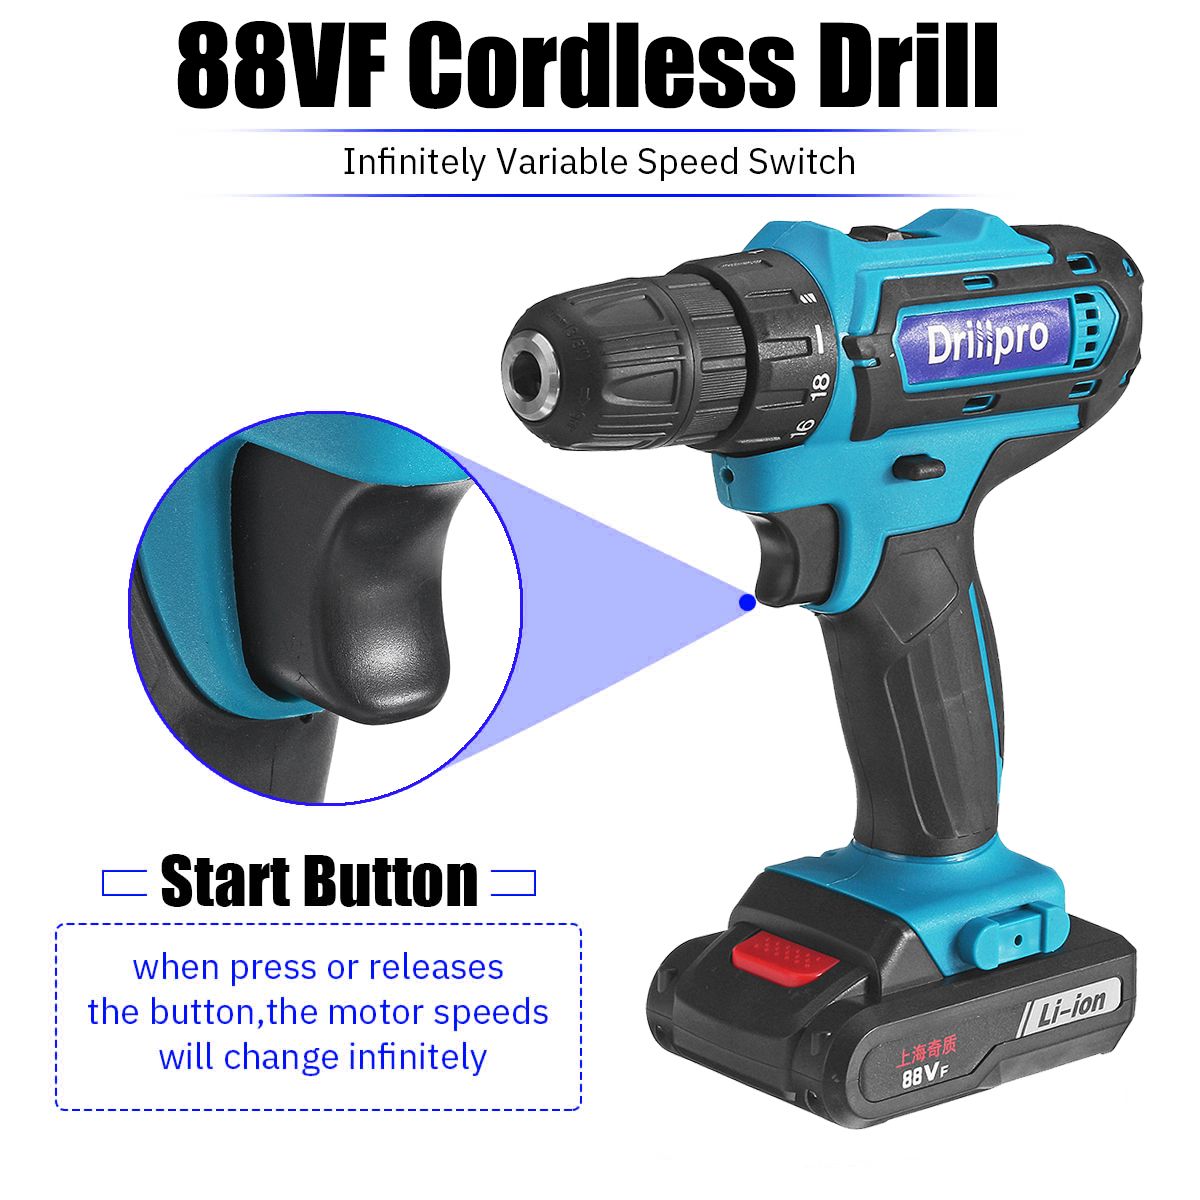 Drillpro-88VF-Cordless-Electric-Drill-Set-Rechargeable-Power-Screwdriver-181-Torque-W-2-Li-ion-Batte-1511982